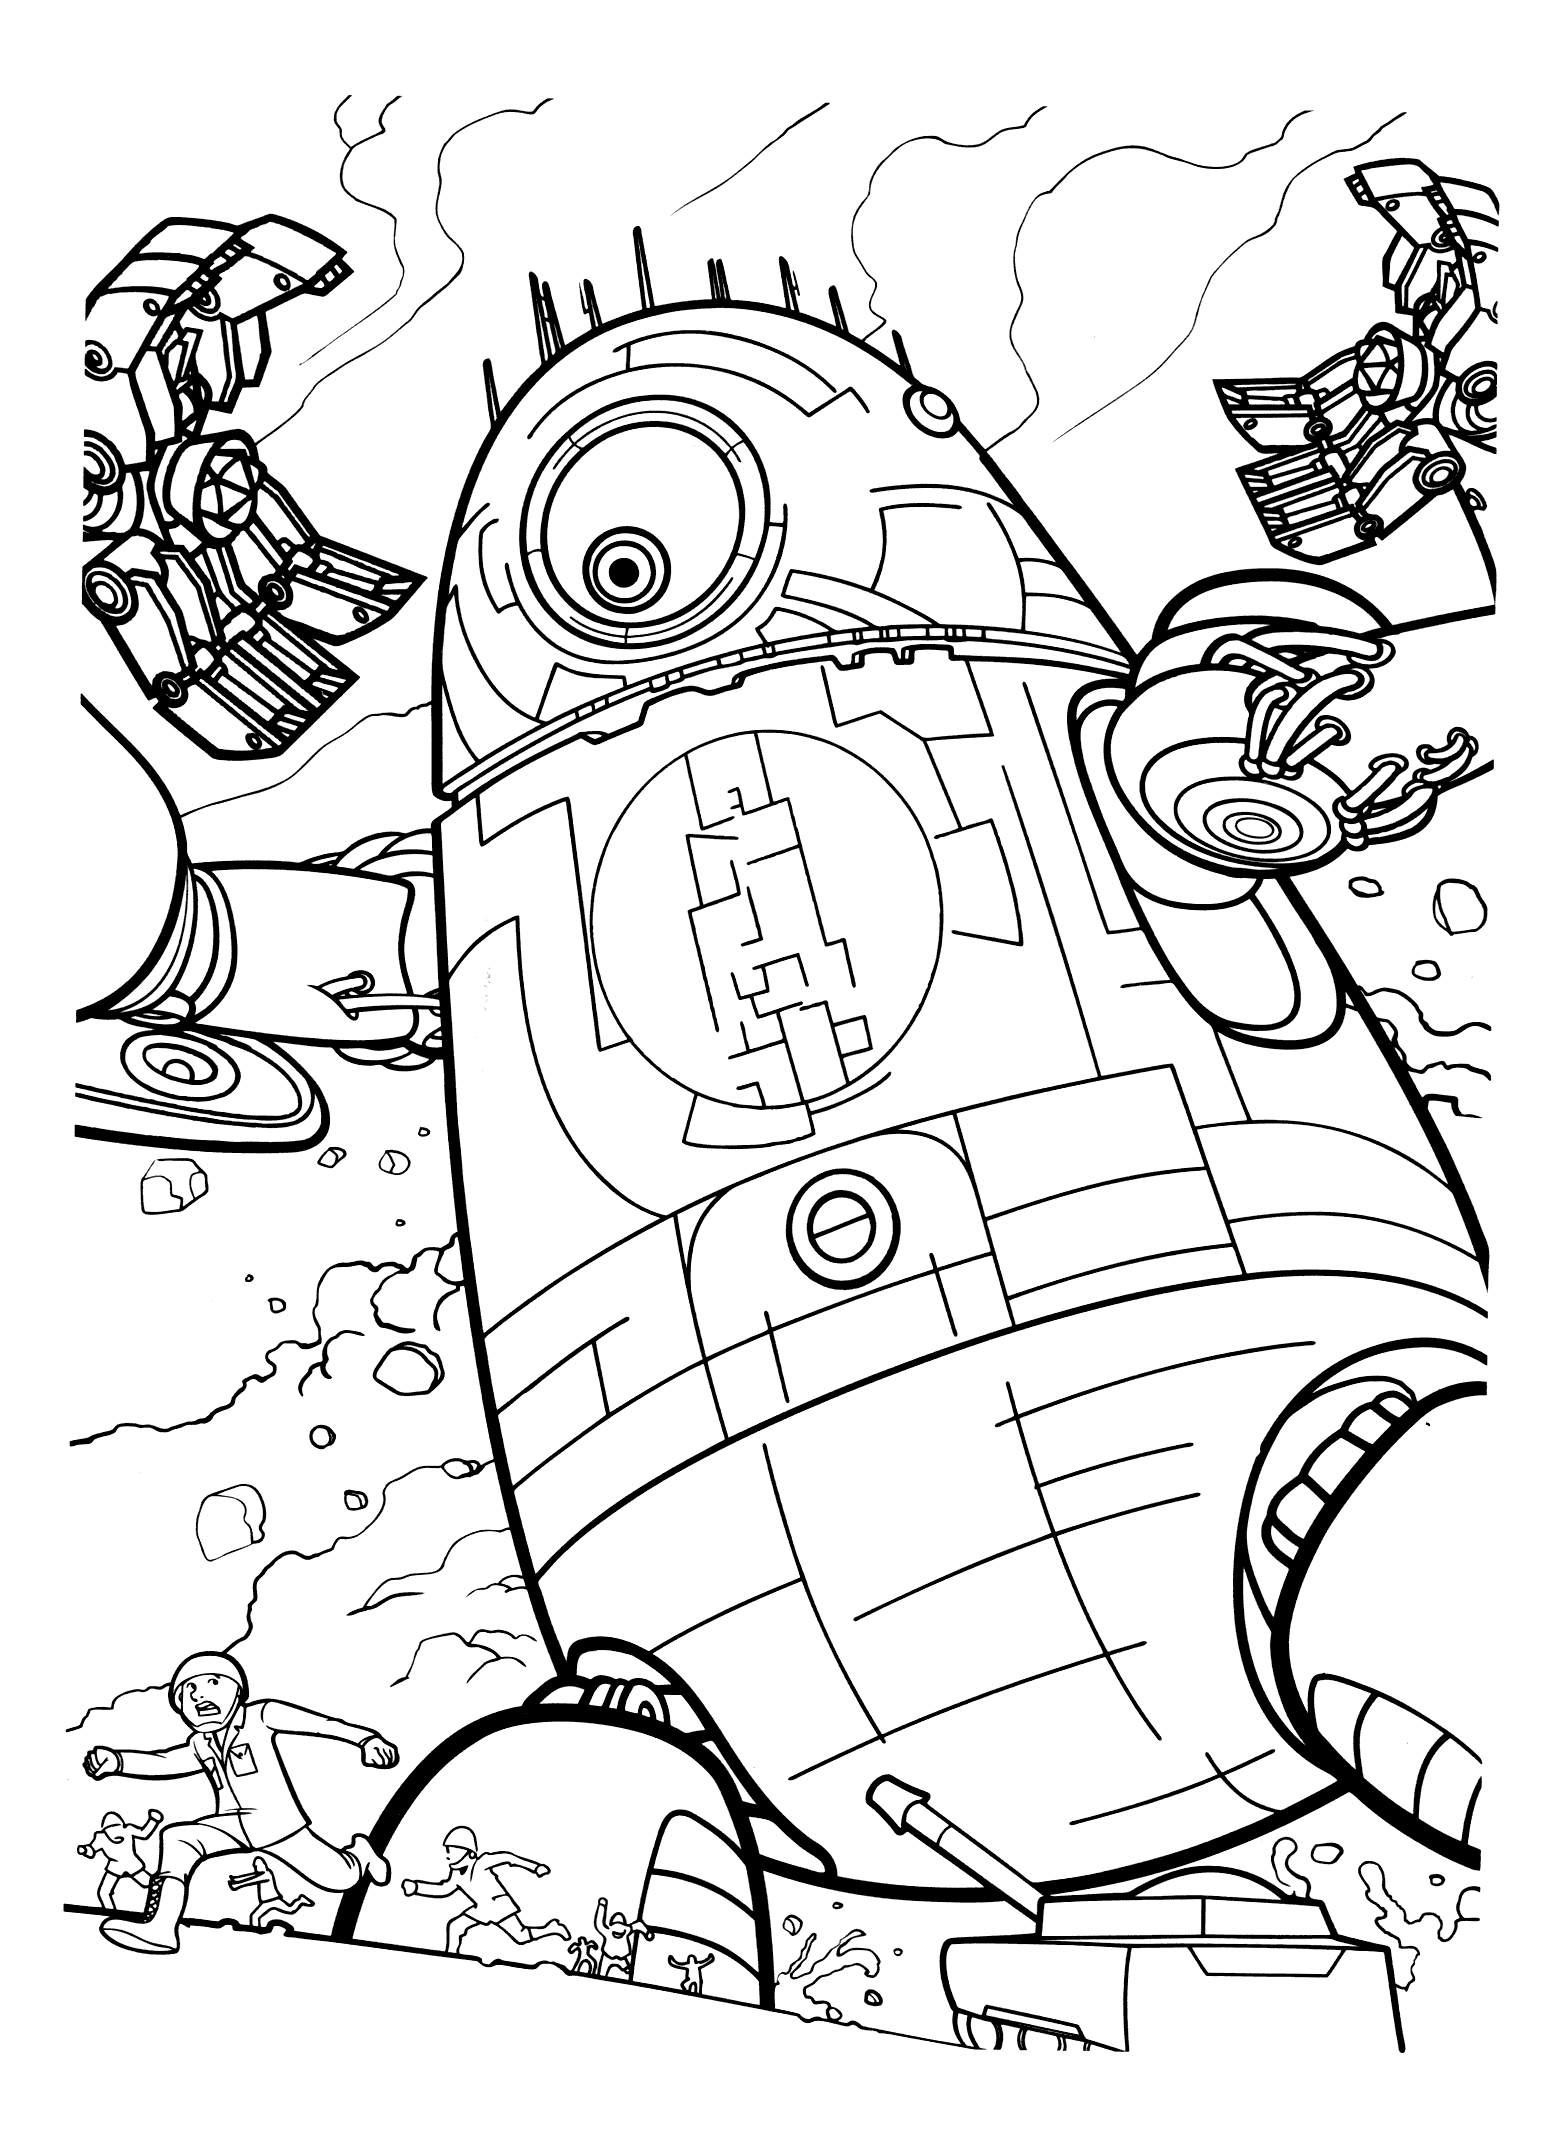 Coloring page - Huge robot